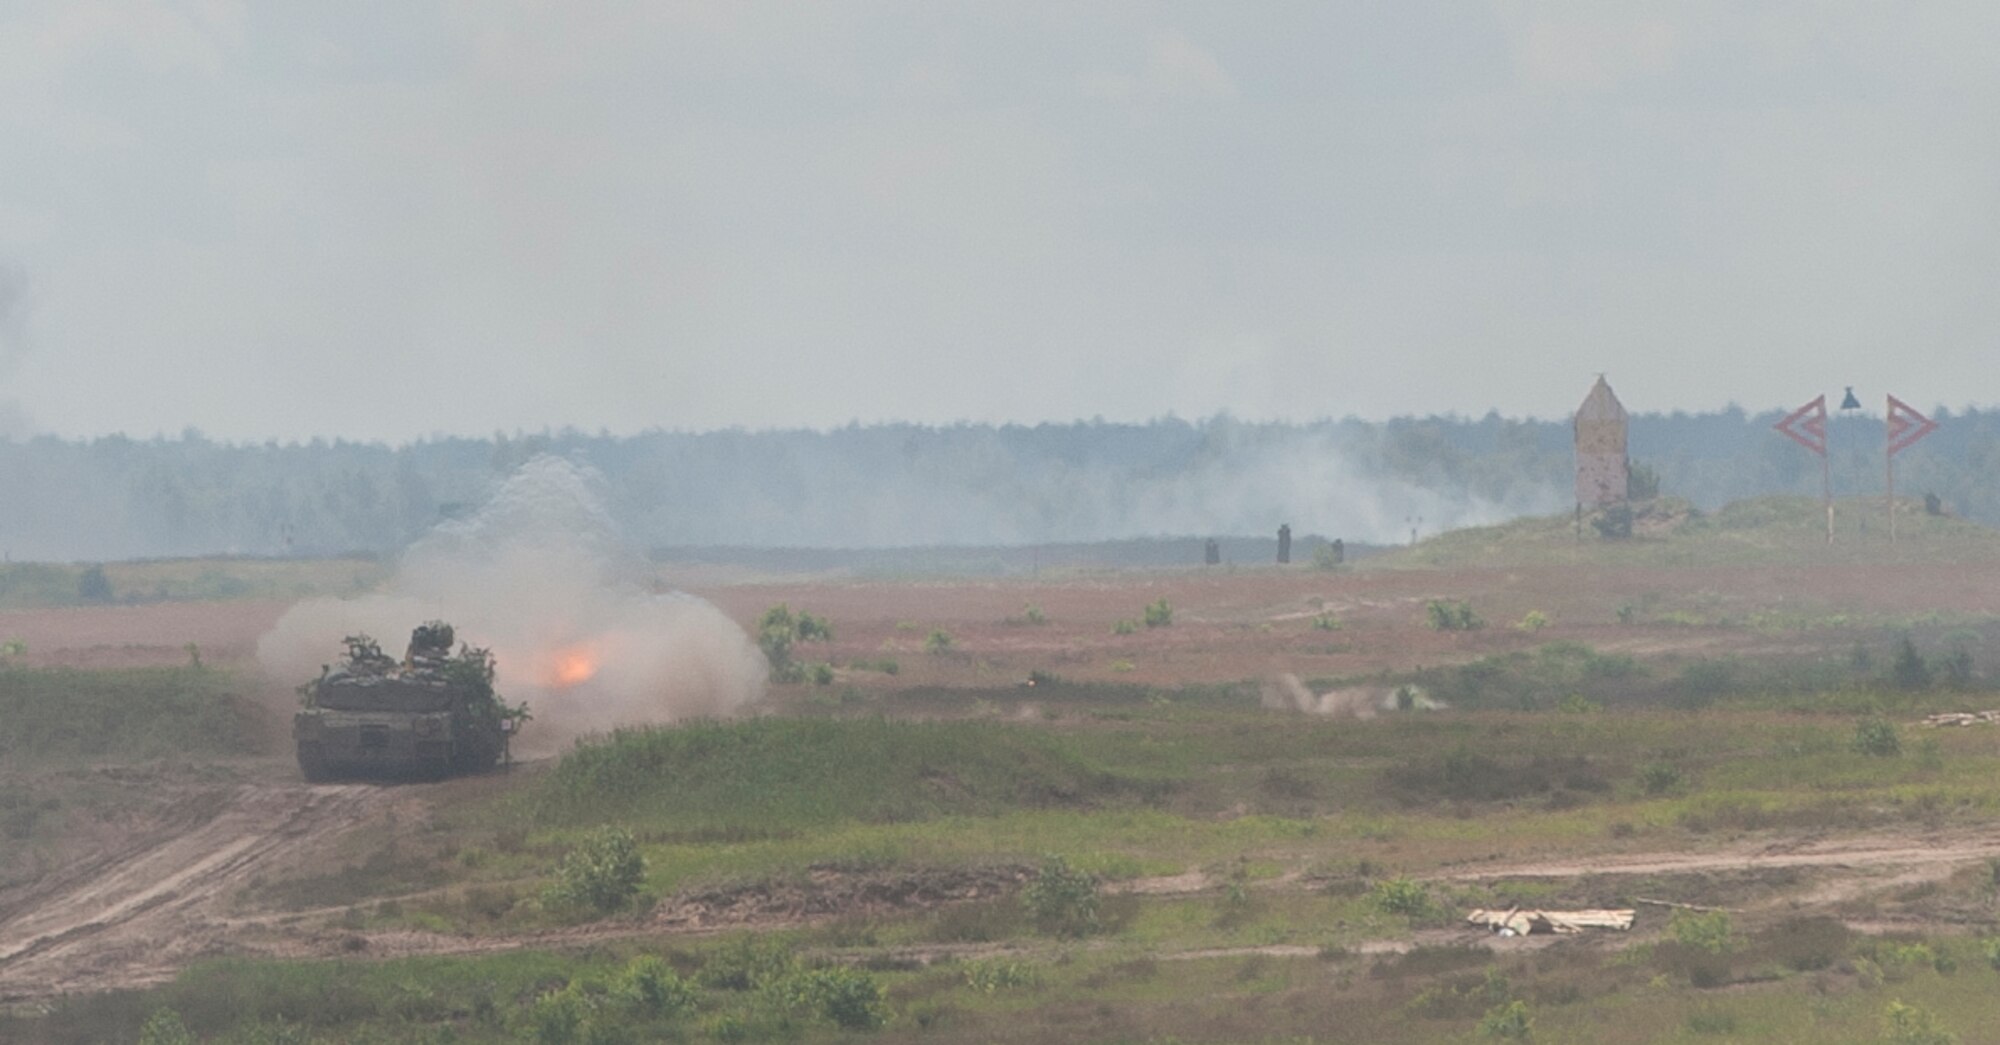 An M1 Abrams tank fires and moves forward with a group of tanks as part of a live-fire event during exercise Anakonda 2016 June 16, 2016, in Poland. The event was an opportunity for U.S. Airmen to train alongside allies and test aircraft, vehicles and other equipment in a live-fire exercise. The event served as a wrap up for Anakonda 2016, a Polish-led international exercise that aimed to train, exercise and integrate Poland and its allied forces by demonstrating their defense capabilities to deploy in mass numbers and sustain combat power. (U.S. Air Force photo/Airman 1st Class Lane T. Plummer)